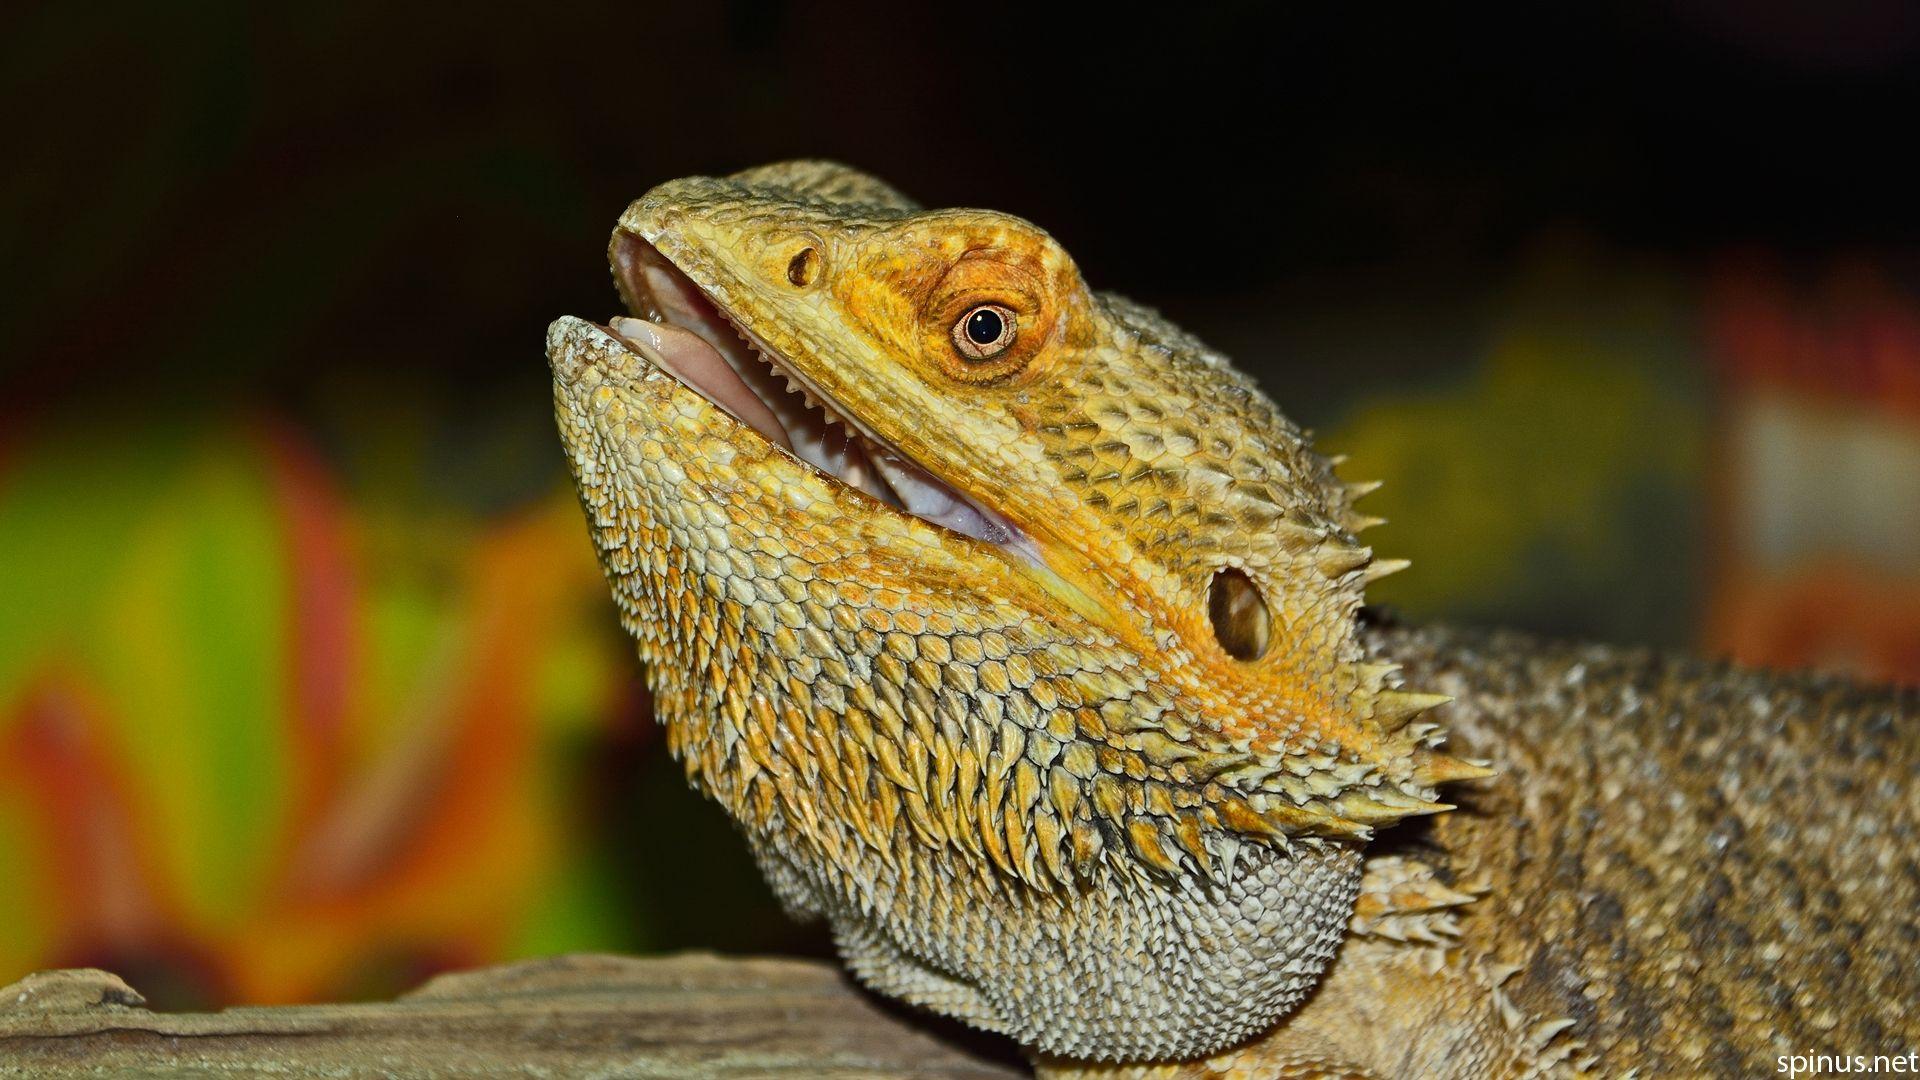 Bearded Dragons Wallpapers - Wallpaper Cave.